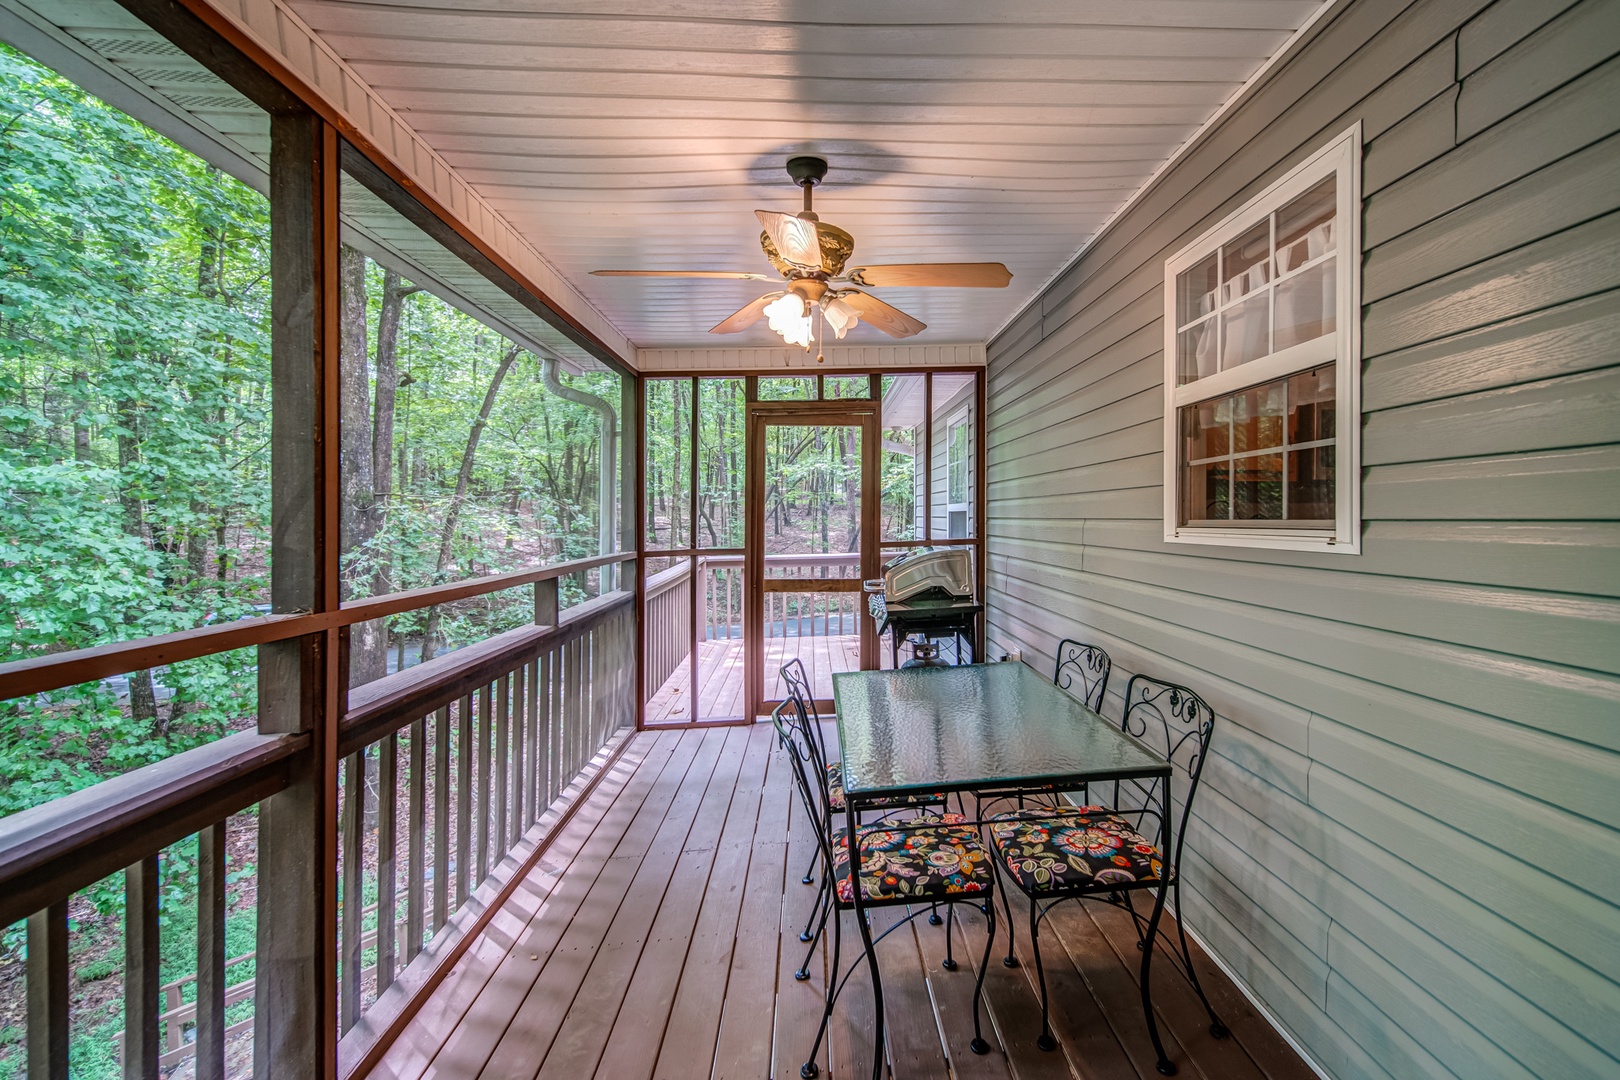 Dine al fresco on the screened-in porch, where you’ll find dining seating for 4